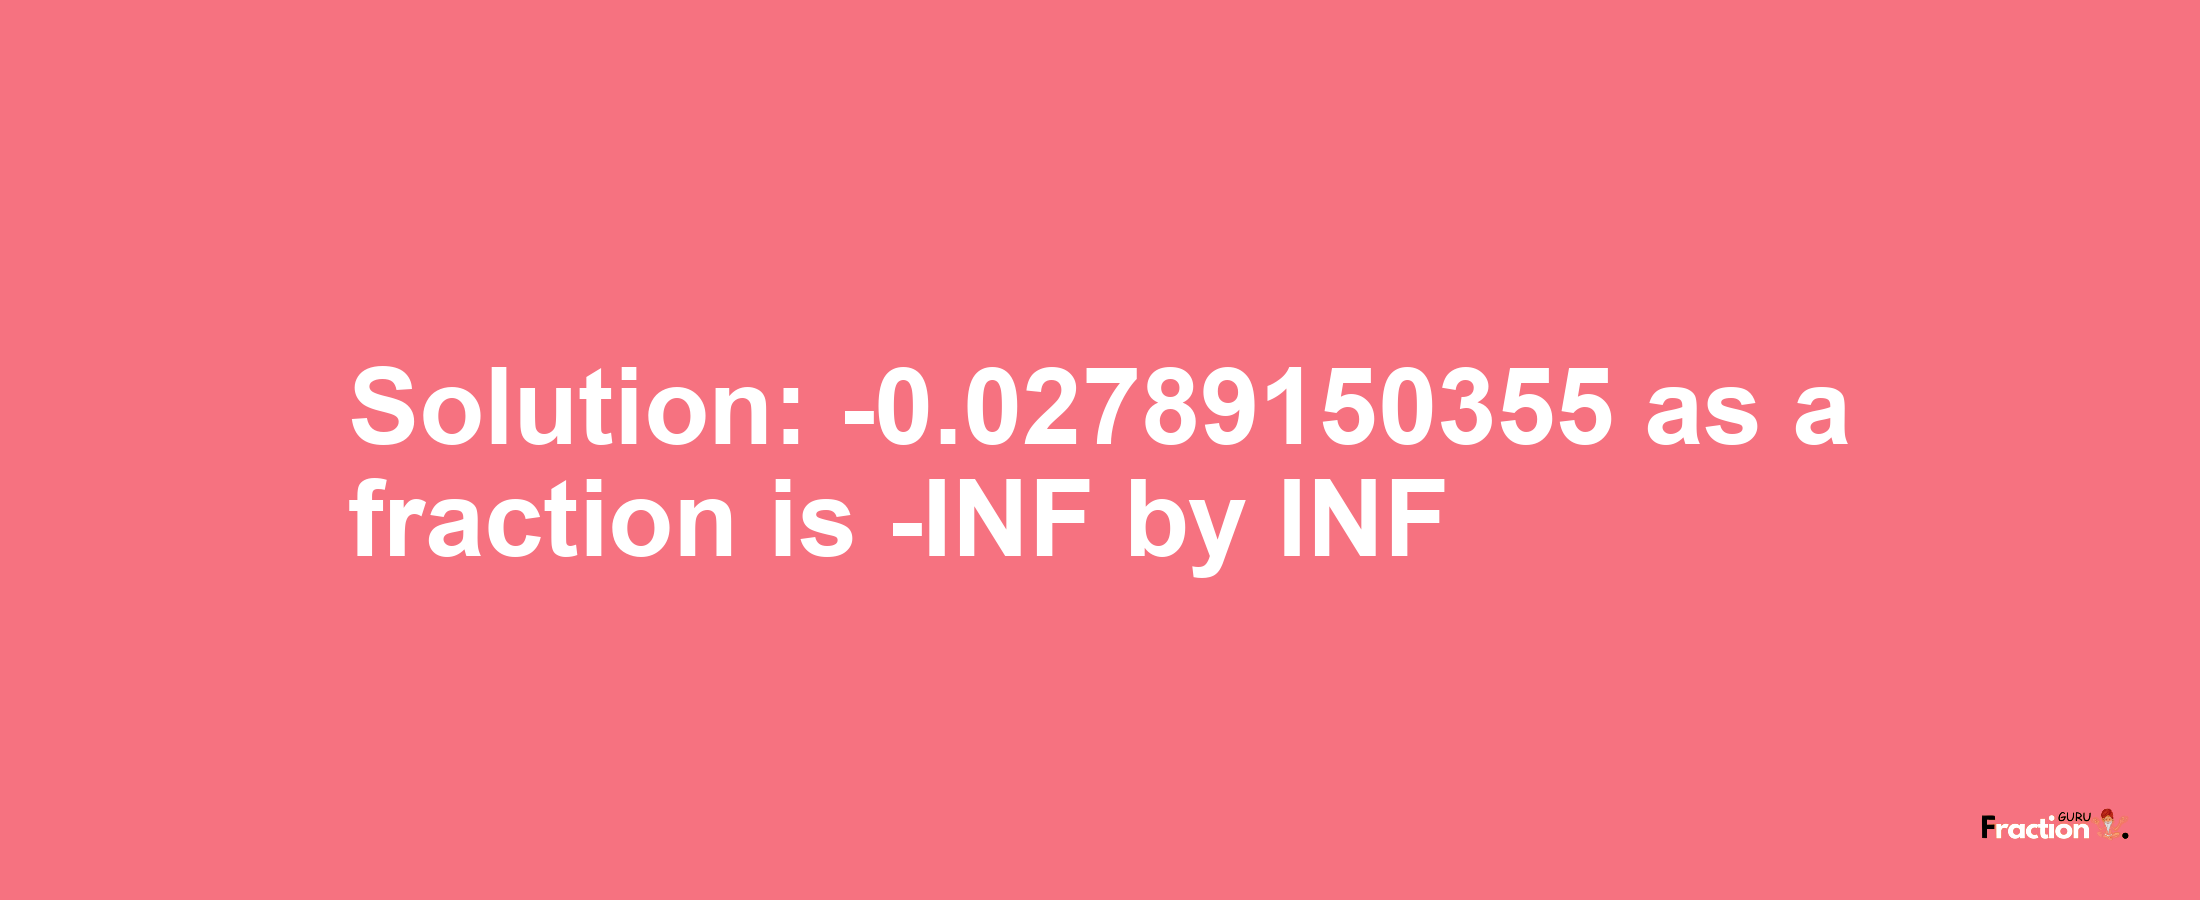 Solution:-0.02789150355 as a fraction is -INF/INF